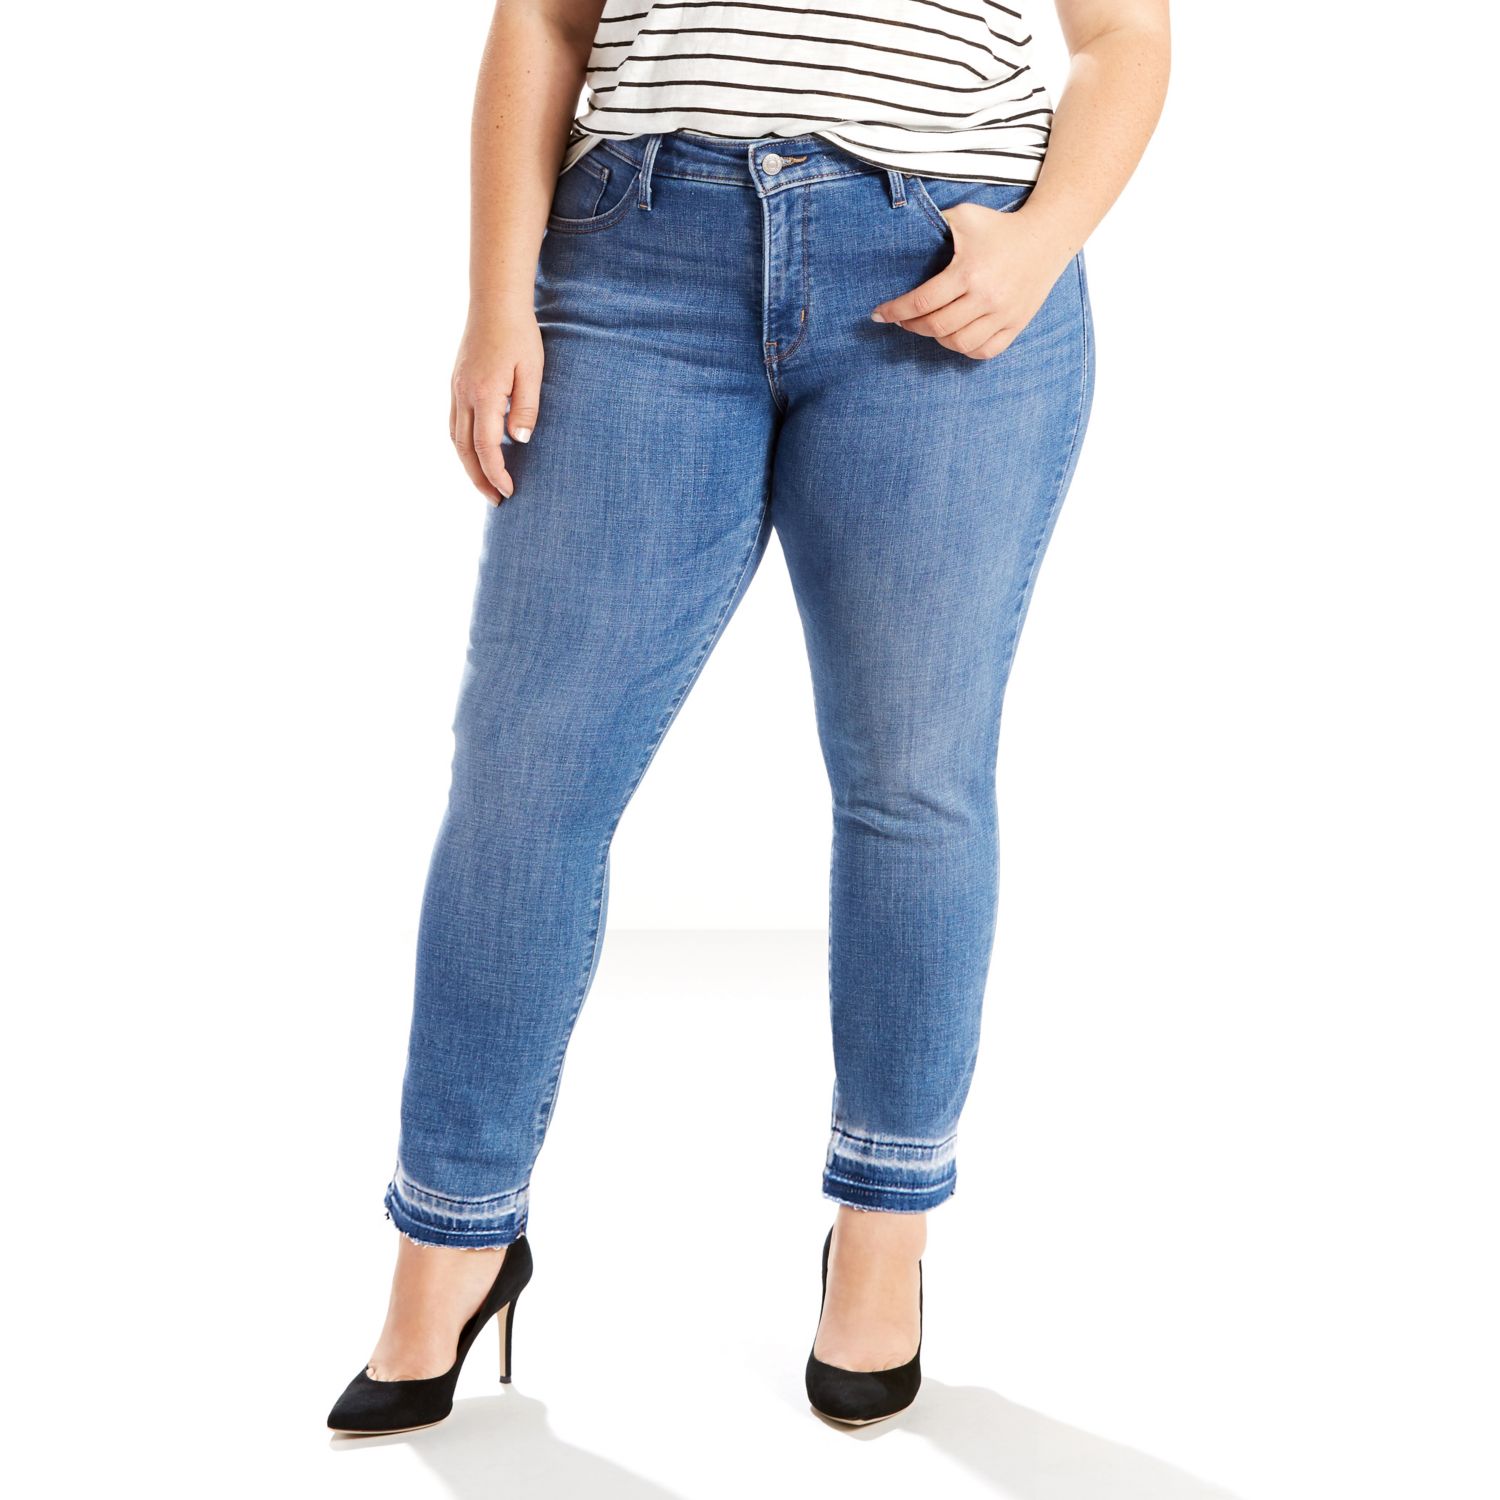 Plus Size Levi's 311 Shaping Skinny Jeans